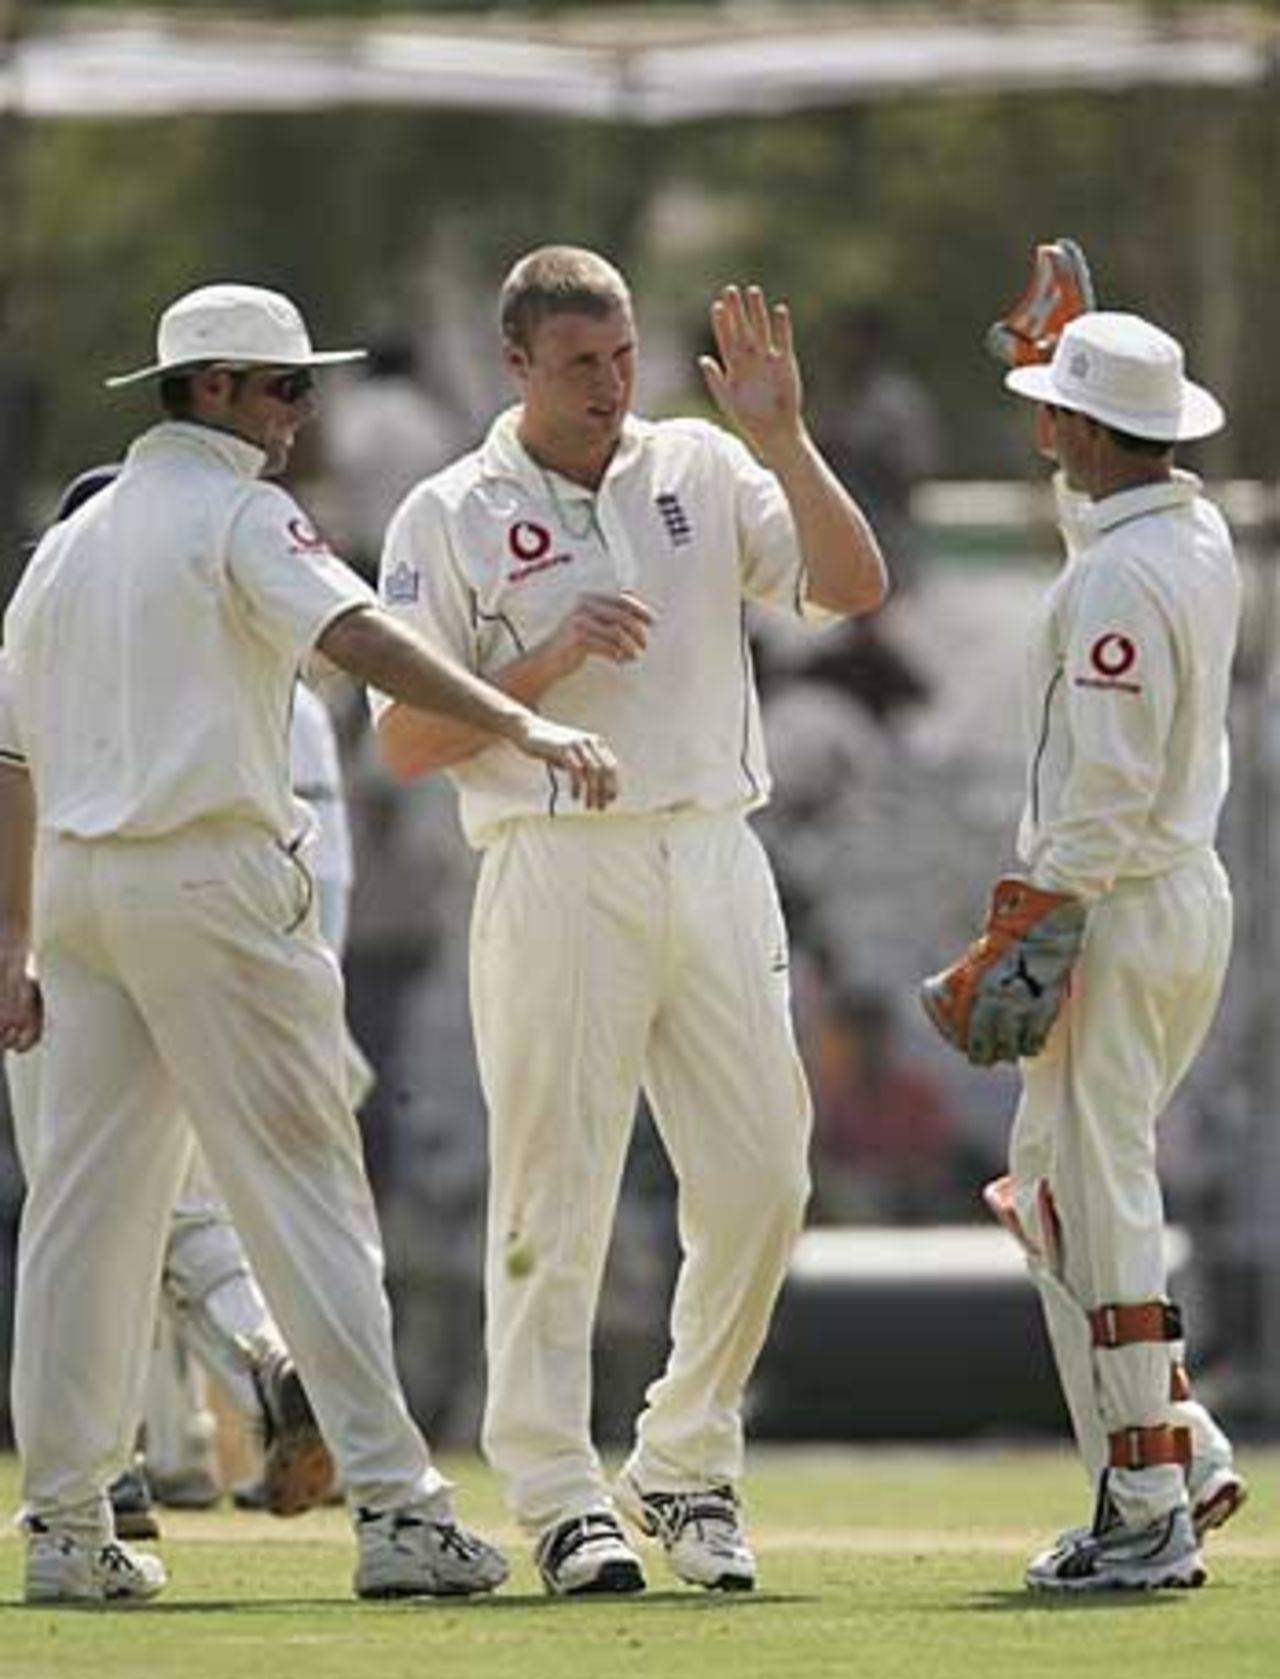 Andrew Flintoff is congratulated by Geraint Jones and Marcus Trescothick on grabbing a wicket, Indian Board President's XI v England XI, Tour game, Vadodara, 2nd day, February 24, 2006